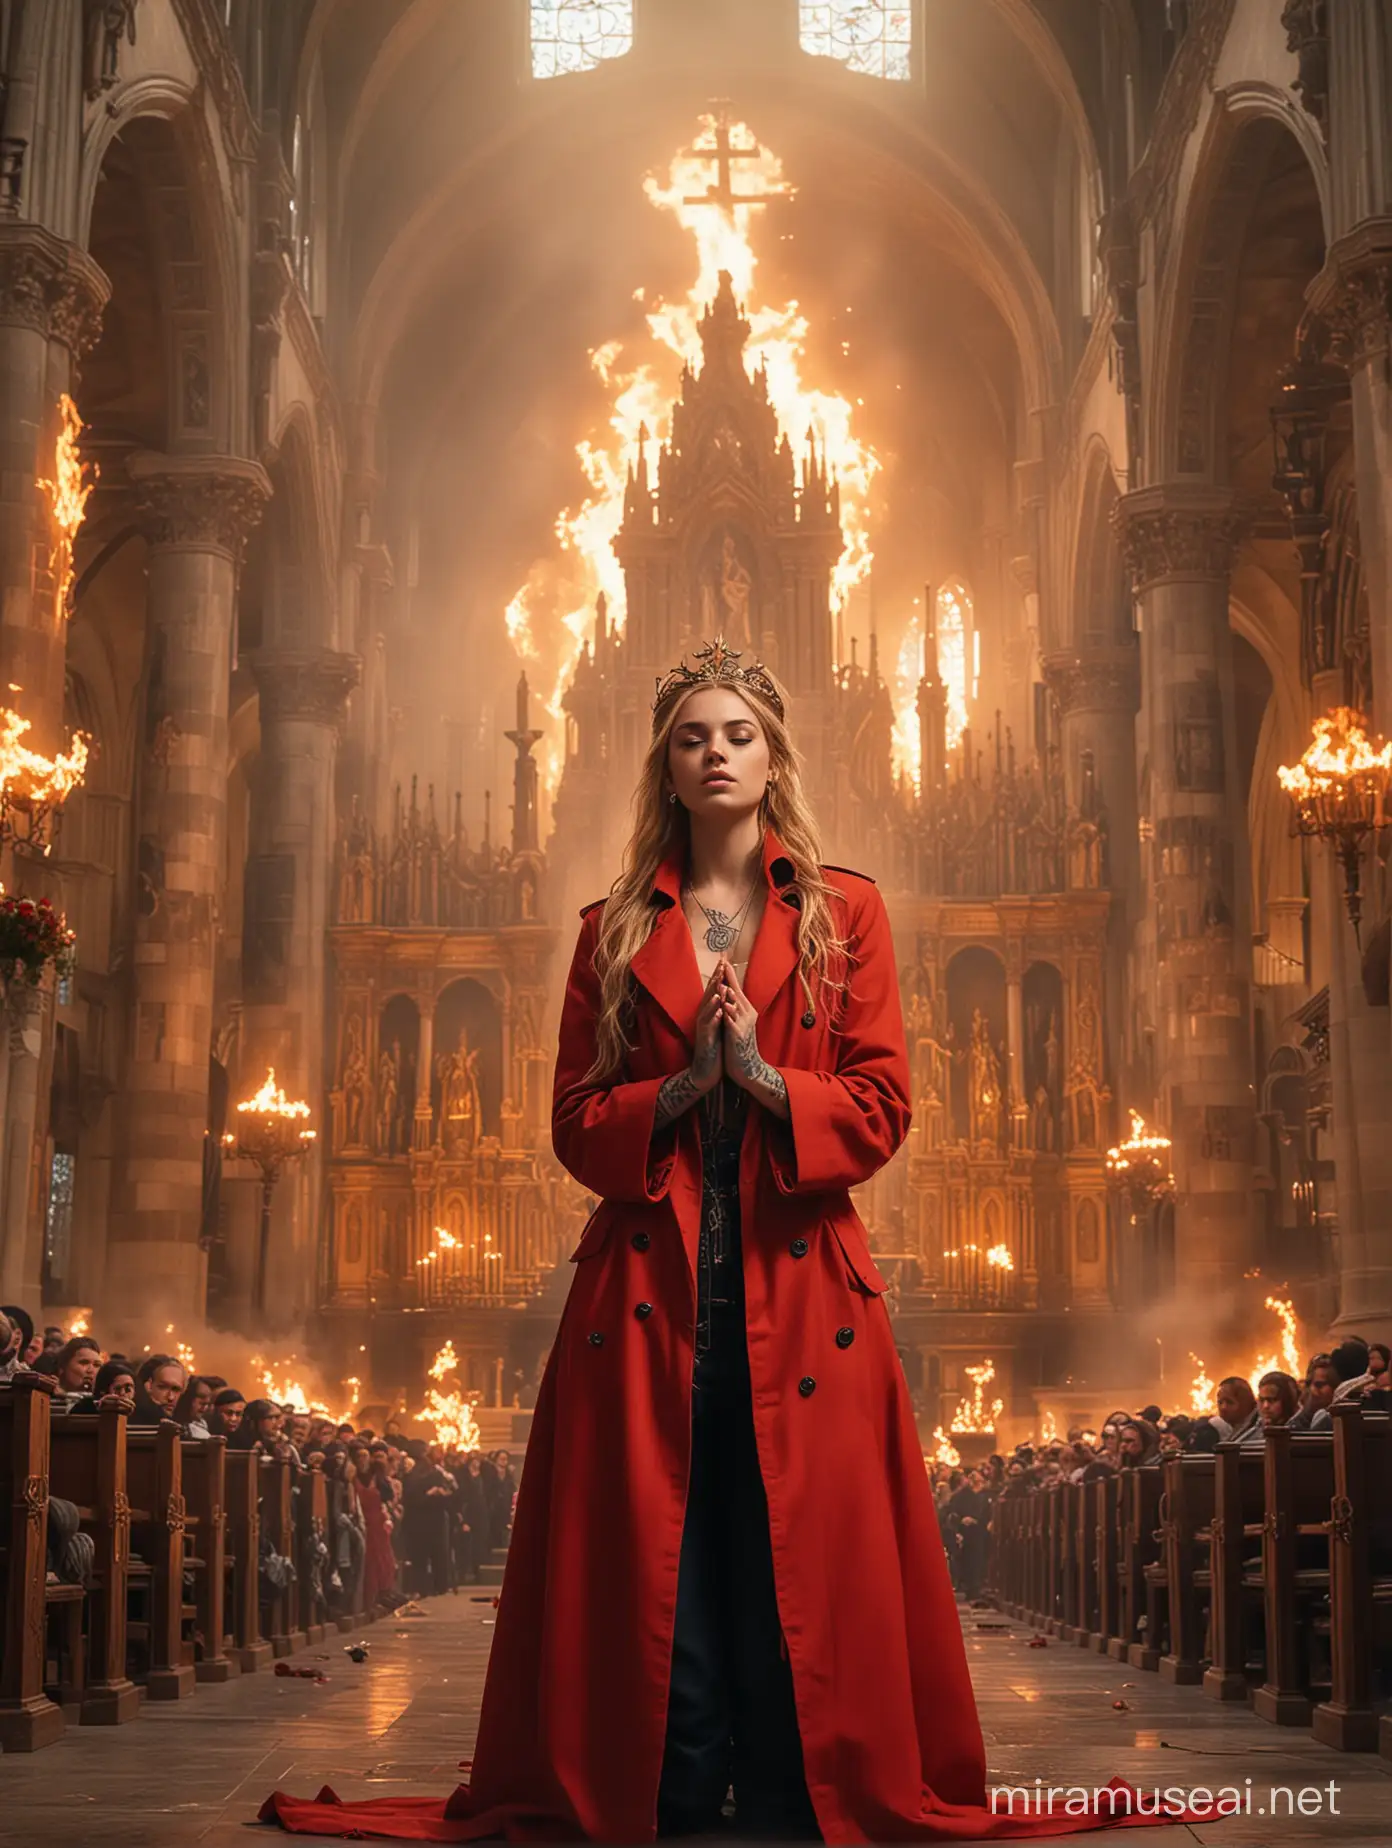 Rebeca the Omen Teenage Empress Goddess in Fiery Cathedral with Giant Peacock